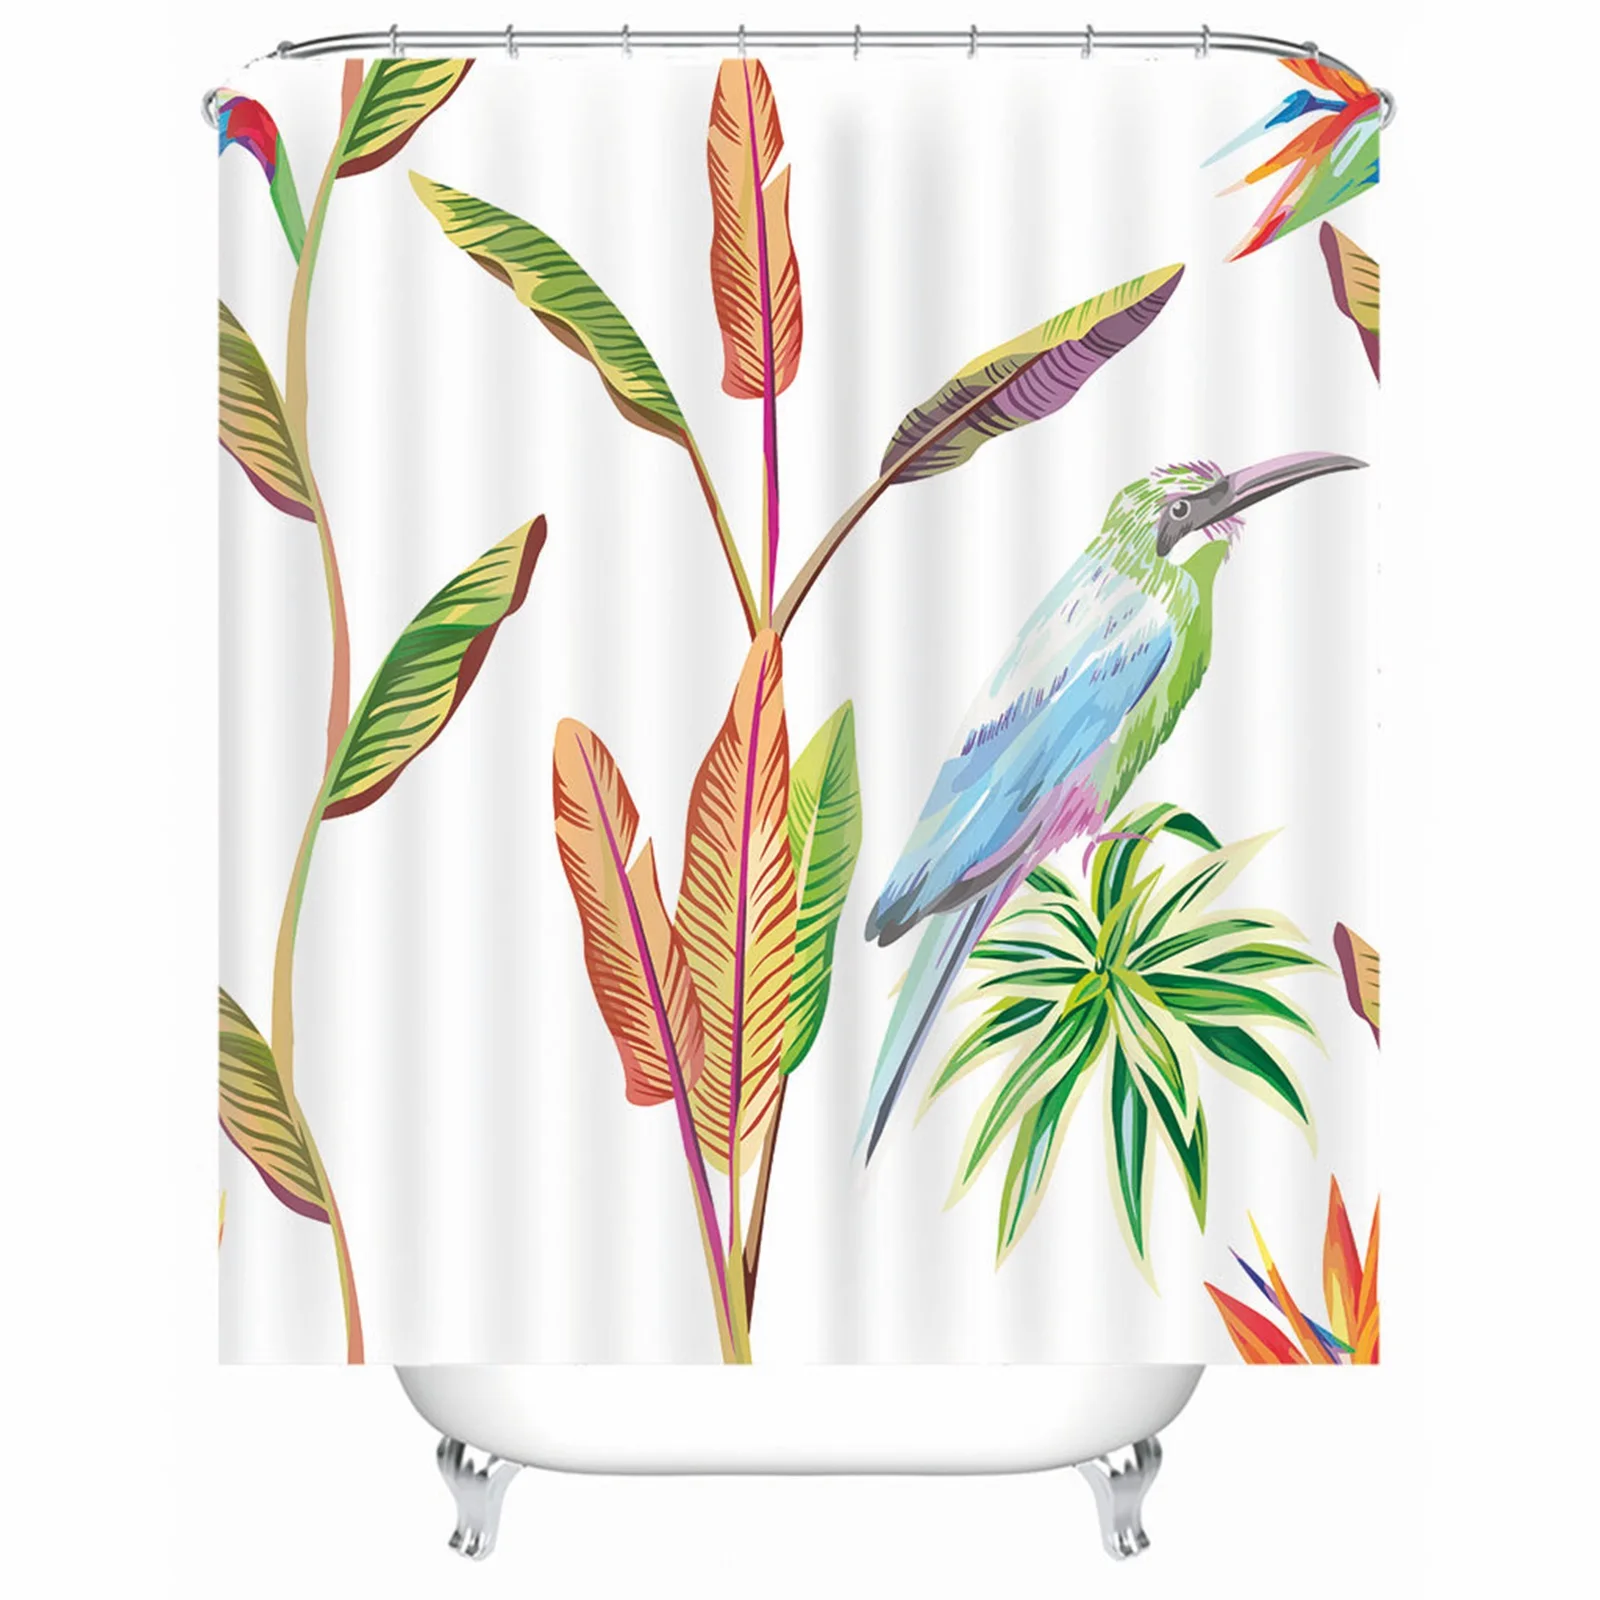 

Extra Long Shower Curtains Polyester Parrot Leaf White Mold & Mildew Resistant Waterproofwith Rustproof Grommets Hooks